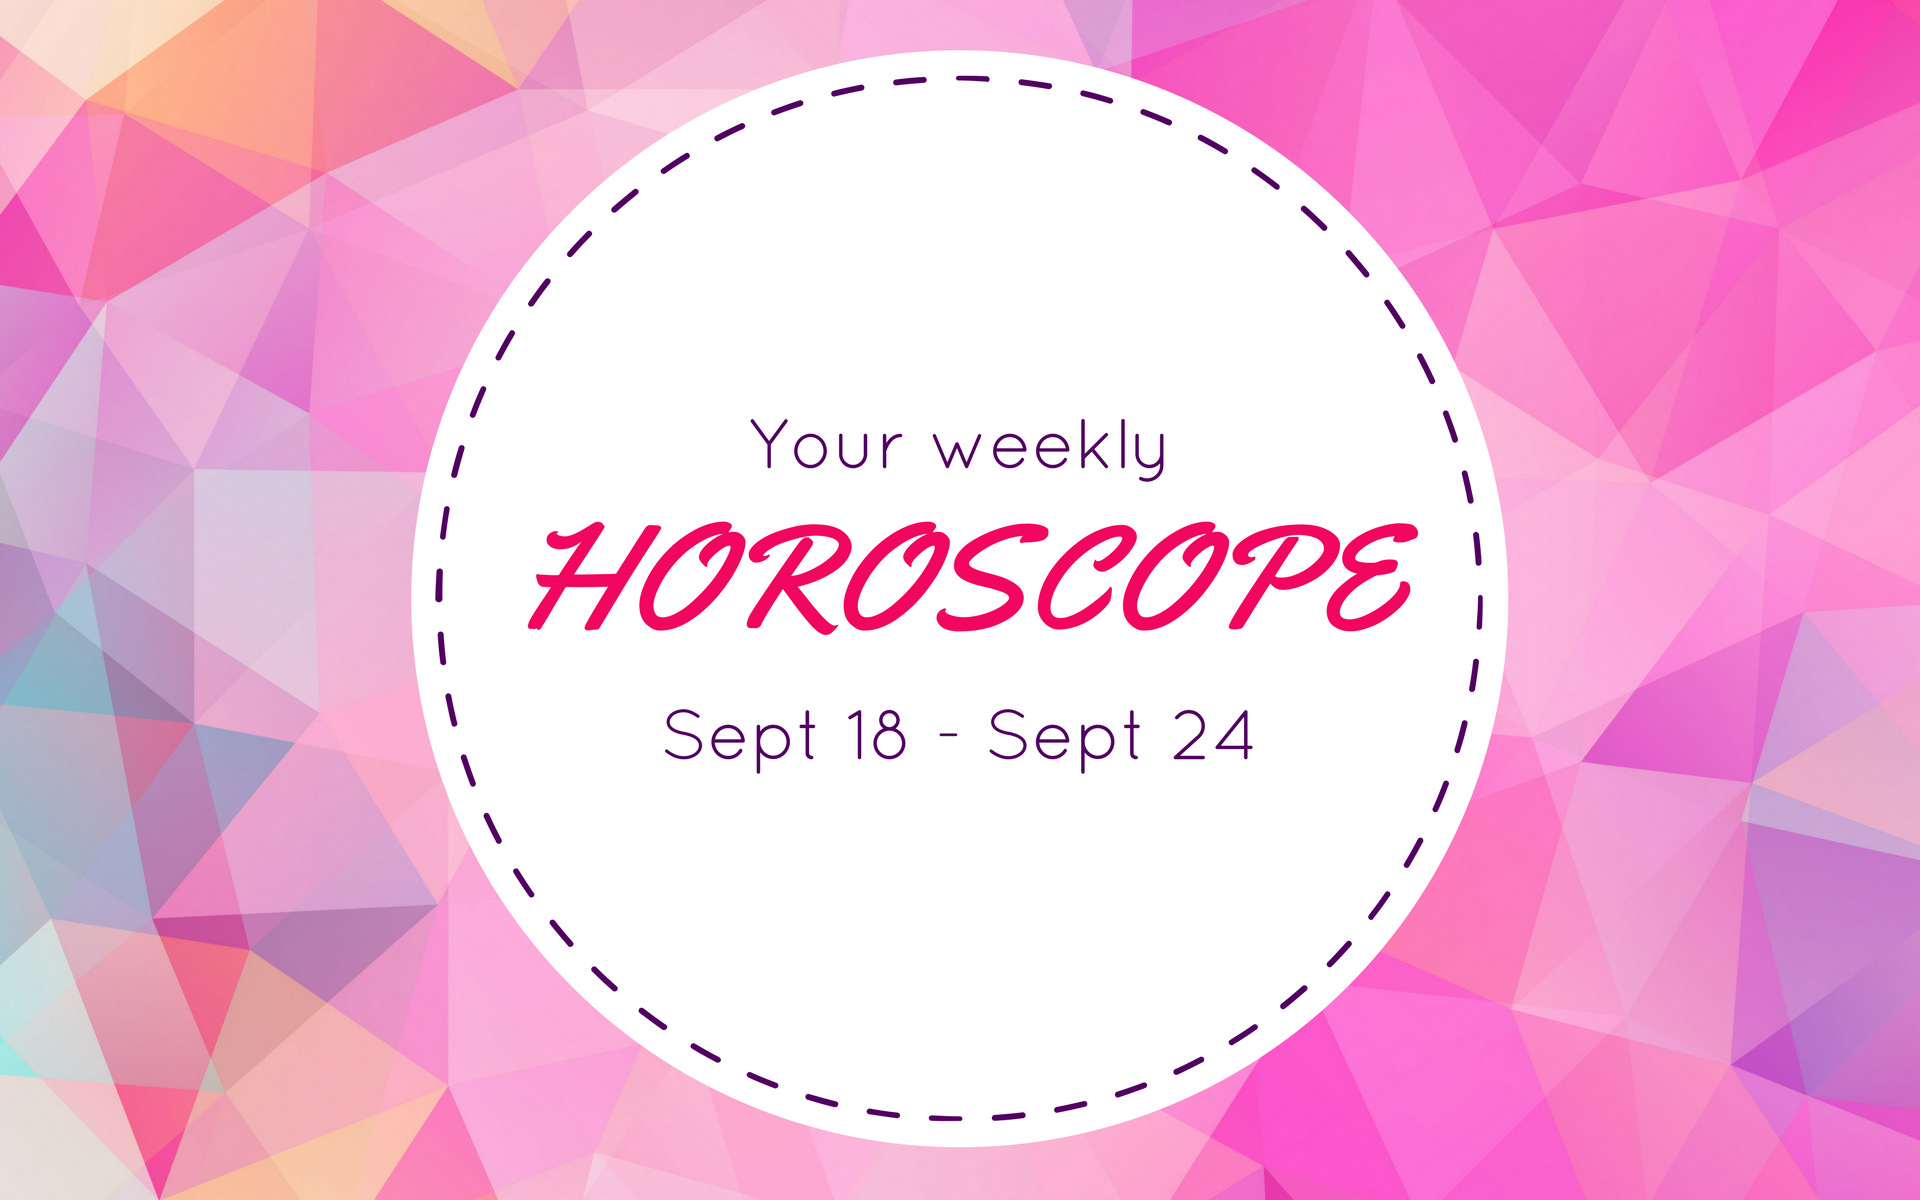 Your Weekly Horoscope: Sept 18 - Sept 24